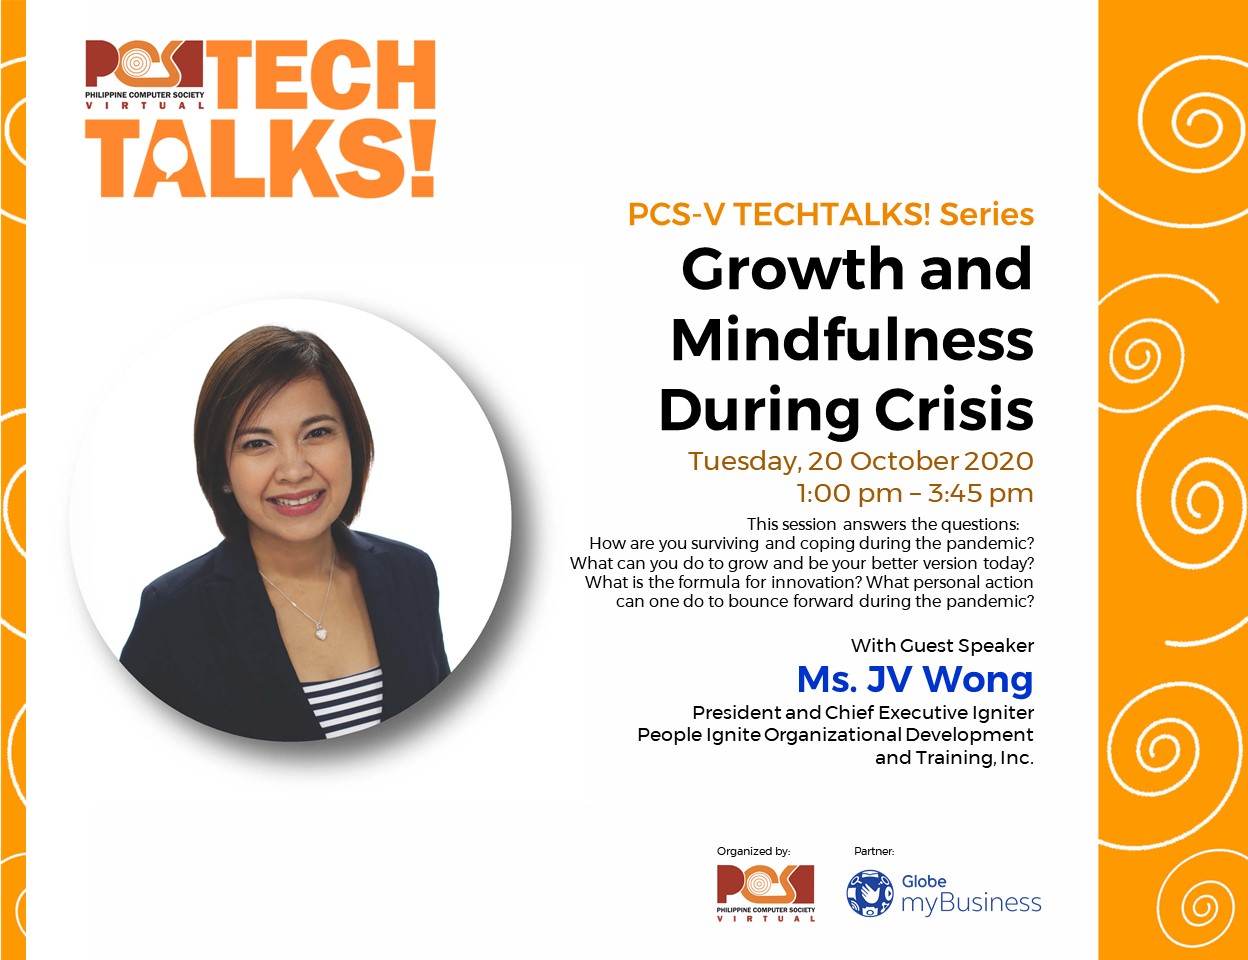 20 October 2020 PCS-V TECHTALKS!: Growth and Mindfulness During Crisis